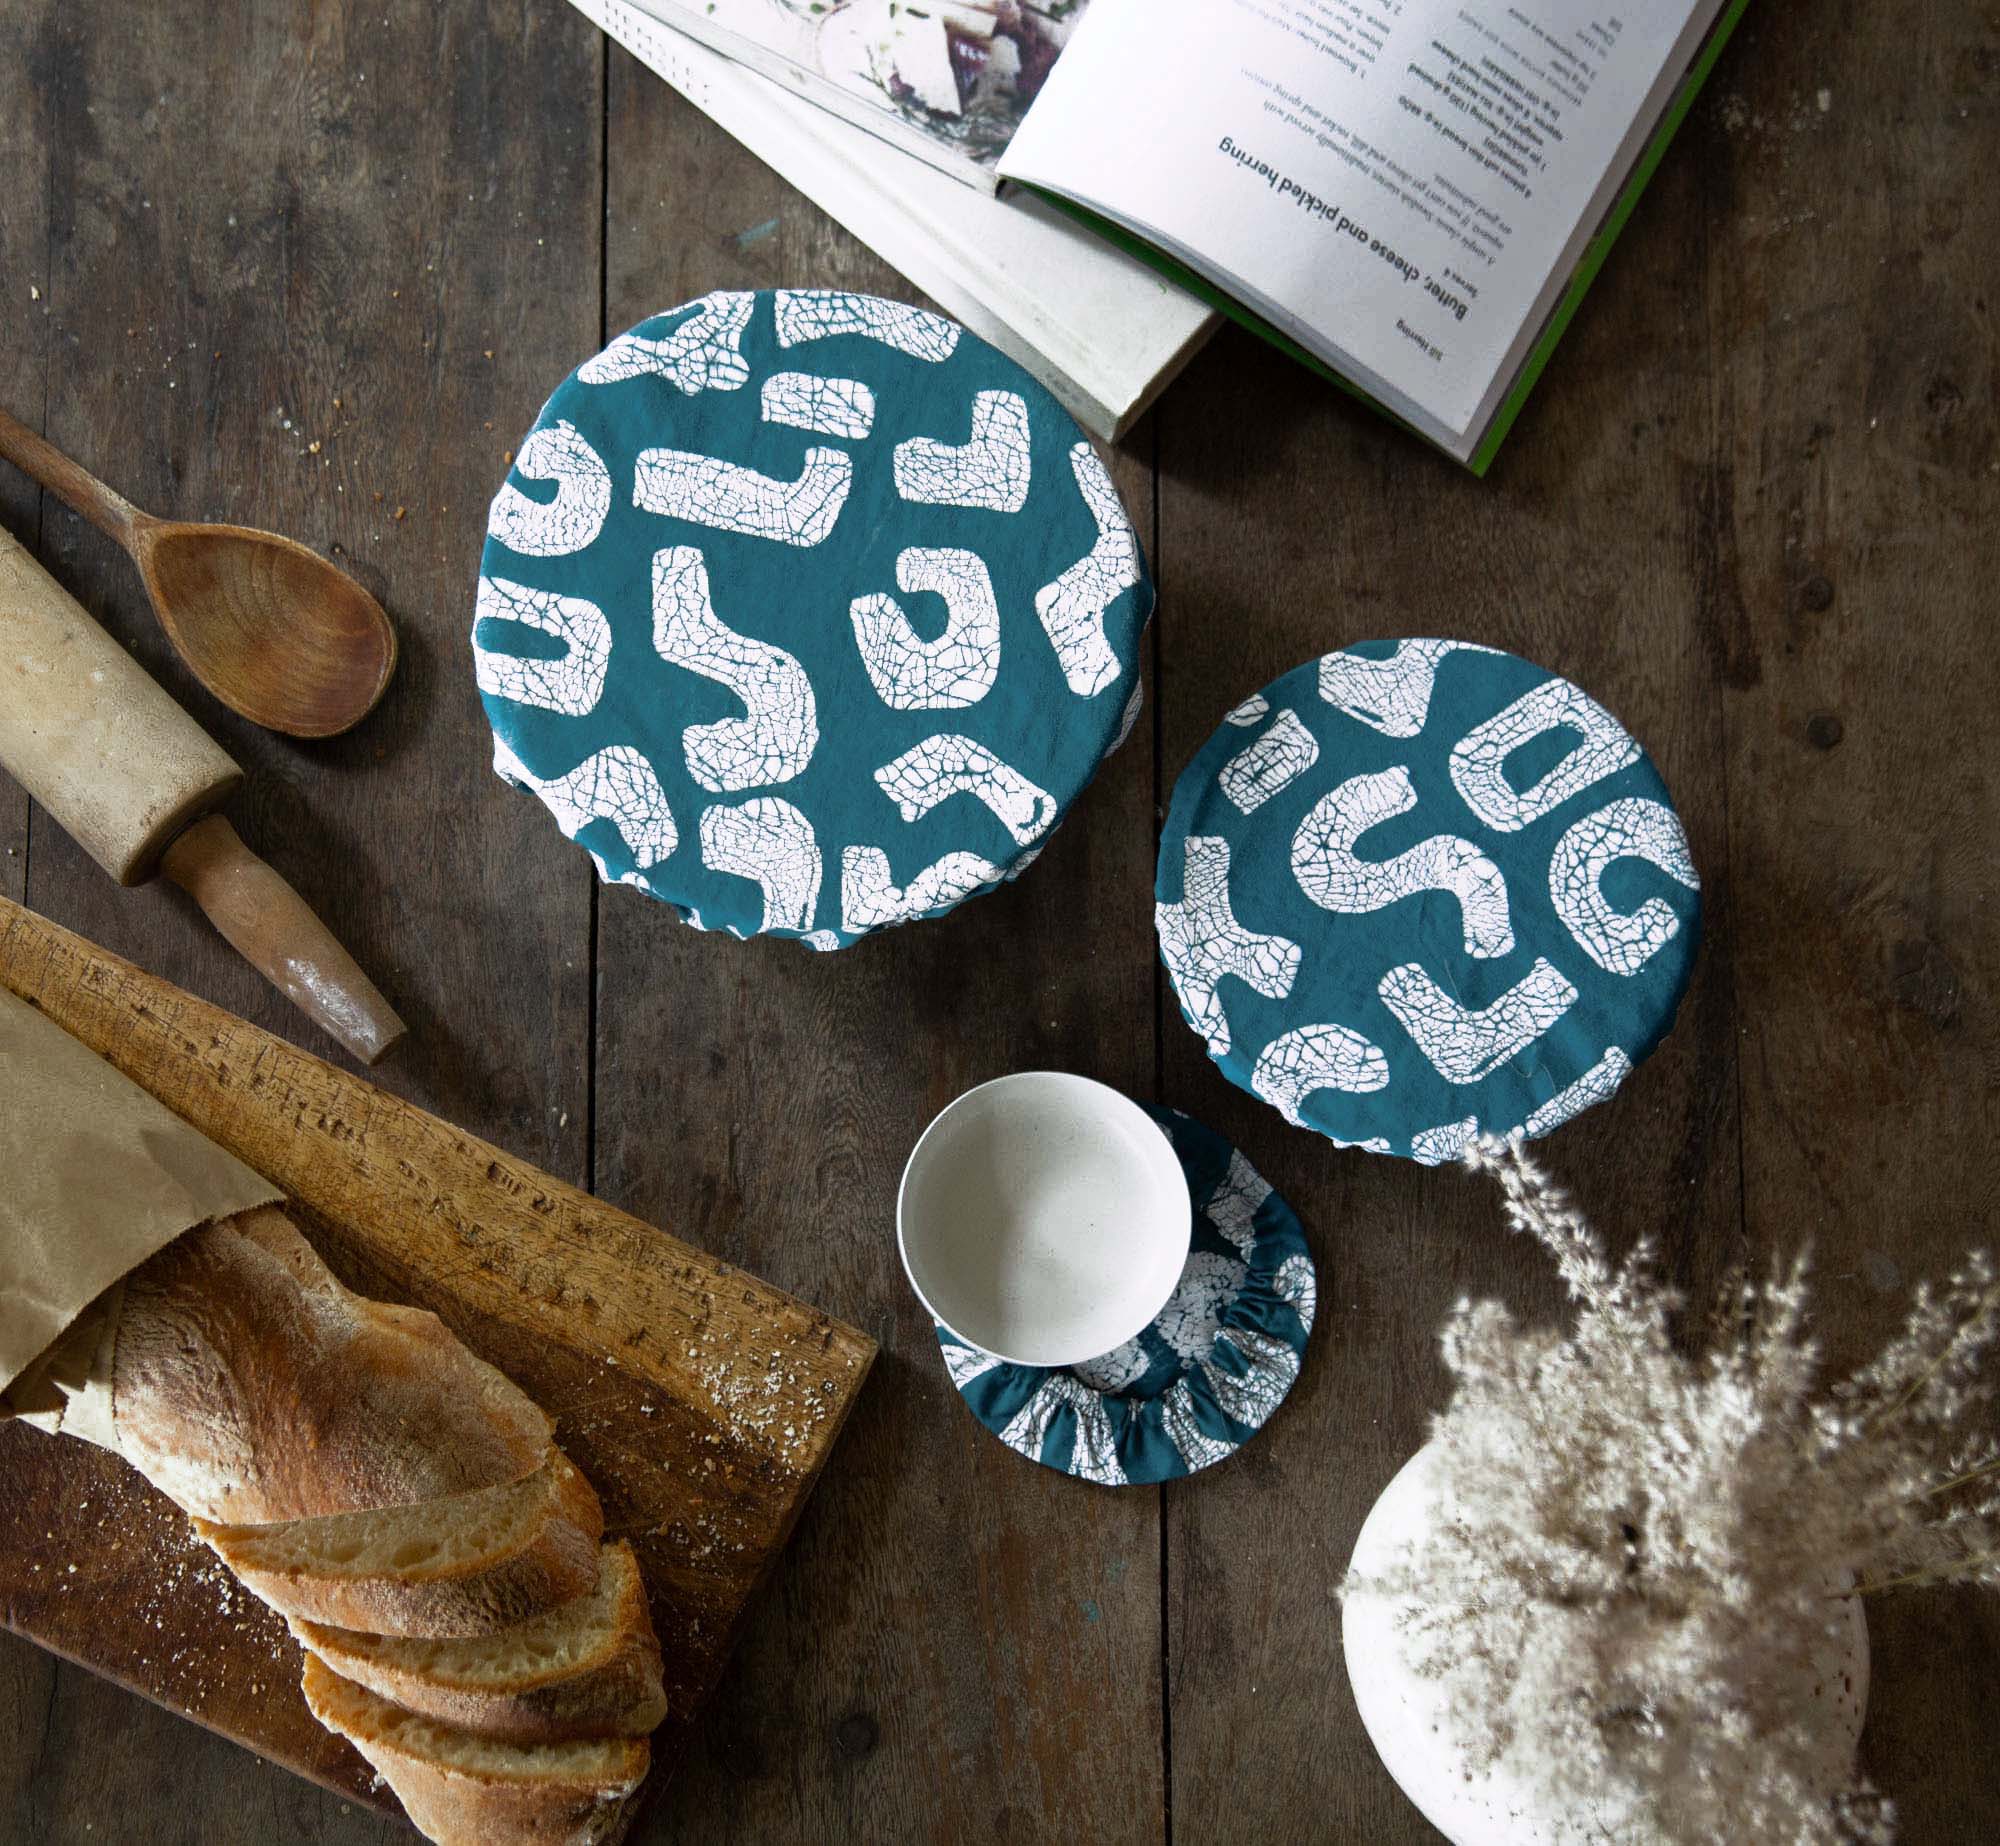 African made teal bowl covers adorned in a squiggle pattern, with sustainably sourced elastic and fabric.